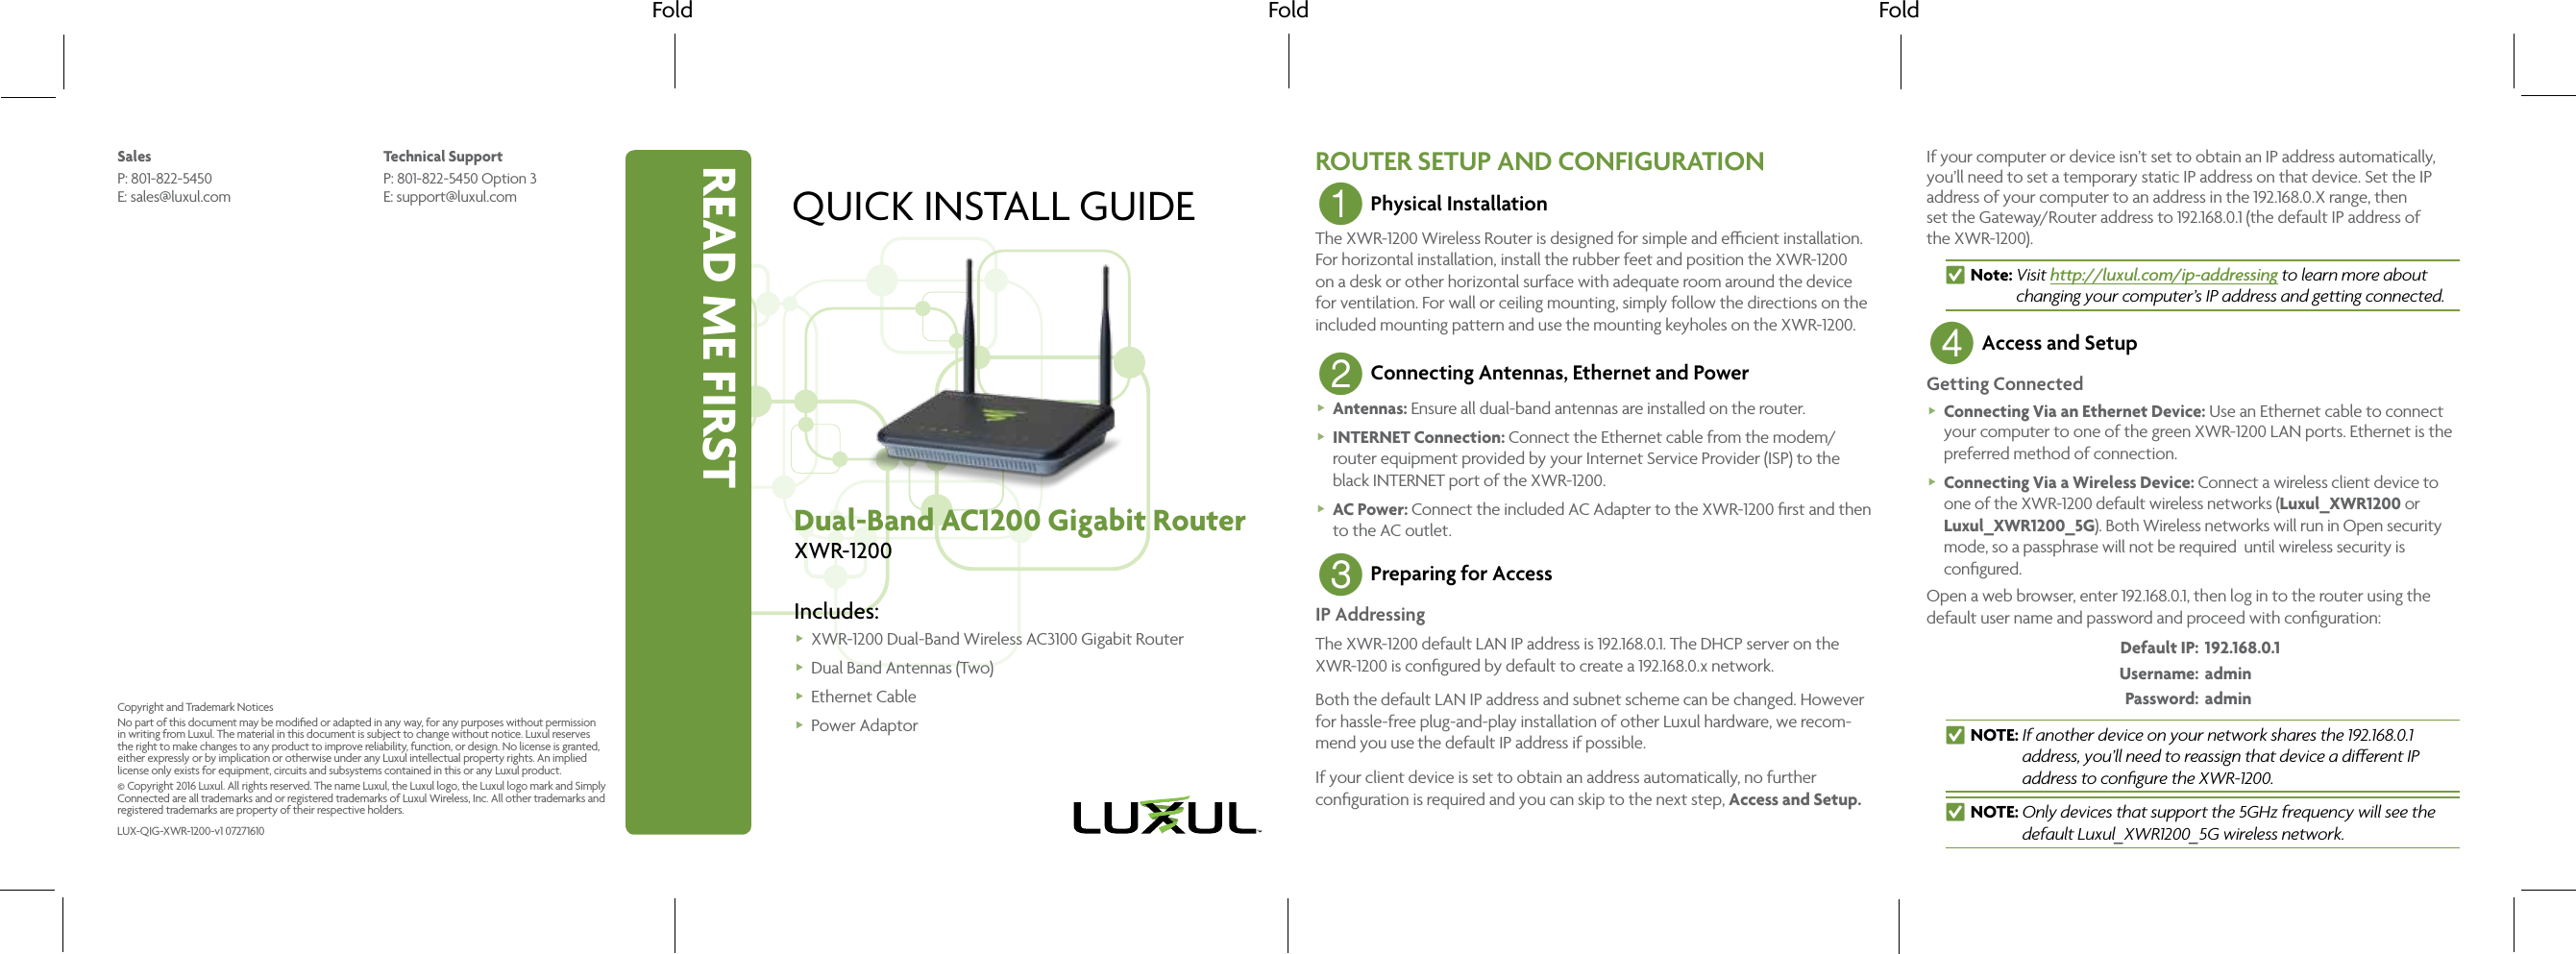 READ ME FIRSTFold Fold FoldQUICK INSTALL GUIDEDual-Band AC1200 Gigabit RouterXWR-1200Includes: XWR-1200 Dual-Band Wireless AC3100 Gigabit Router  Dual Band Antennas (Two) Ethernet Cable Power AdaptorROUTER SETUP AND CONFIGURATION1 Physical InstallationThe XWR-1200 Wireless Router is designed for simple and ecient installation. For horizontal installation, install the rubber feet and position the XWR-1200 on a desk or other horizontal surface with adequate room around the device for ventilation. For wall or ceiling mounting, simply follow the directions on the included mounting pattern and use the mounting keyholes on the XWR-1200. 2 Connecting Antennas, Ethernet and Power Antennas: Ensure all dual-band antennas are installed on the router. INTERNET Connection: Connect the Ethernet cable from the modem/router equipment provided by your Internet Service Provider (ISP) to the black INTERNET port of the XWR-1200. AC Power: Connect the included AC Adapter to the XWR-1200 ﬁrst and then to the AC outlet.3 Preparing for AccessIP AddressingThe XWR-1200 default LAN IP address is 192.168.0.1. The DHCP server on the XWR-1200 is conﬁgured by default to create a 192.168.0.x network.Both the default LAN IP address and subnet scheme can be changed. However for hassle-free plug-and-play installation of other Luxul hardware, we recom-mend you use the default IP address if possible.If your client device is set to obtain an address automatically, no further conﬁguration is required and you can skip to the next step, Access and Setup.If your computer or device isn’t set to obtain an IP address automatically, you’ll need to set a temporary static IP address on that device. Set the IP address of your computer to an address in the 192.168.0.X range, then  set the Gateway/Router address to 192.168.0.1 (the default IP address of  the XWR-1200). nNote:    Visit  http://luxul.com/ip-addressing to learn more about changing your computer’s IP address and getting connected.4 Access and SetupGetting Connected Connecting Via an Ethernet Device: Use an Ethernet cable to connect your computer to one of the green XWR-1200 LAN ports. Ethernet is the preferred method of connection. Connecting Via a Wireless Device: Connect a wireless client device to one of the XWR-1200 default wireless networks (Luxul_XWR1200 or Luxul_XWR1200_5G). Both Wireless networks will run in Open security mode, so a passphrase will not be required  until wireless security is conﬁgured.Open a web browser, enter 192.168.0.1, then log in to the router using the default user name and password and proceed with conﬁguration: Default IP:  192.168.0.1   Username: admin   Password: admin  nNOTE:   If another device on your network shares the 192.168.0.1  address, you’ll need to reassign that device a dierent IP address to conﬁgure the XWR-1200. nNOTE:  Only devices that support the 5GHz frequency will see the default Luxul_XWR1200_5G wireless network.SalesP: 801-822-5450 E: sales@luxul.comTechnical SupportP: 801-822-5450 Option 3 E: support@luxul.comLUX-QIG-XWR-1200-v1 07271610Copyright and Trademark NoticesNo part of this document may be modiﬁed or adapted in any way, for any purposes without permission in writing from Luxul. The material in this document is subject to change without notice. Luxul reserves the right to make changes to any product to improve reliability, function, or design. No license is granted, either expressly or by implication or otherwise under any Luxul intellectual property rights. An implied license only exists for equipment, circuits and subsystems contained in this or any Luxul product.© Copyright 2016 Luxul. All rights reserved. The name Luxul, the Luxul logo, the Luxul logo mark and Simply Connected are all trademarks and or registered trademarks of Luxul Wireless, Inc. All other trademarks and registered trademarks are property of their respective holders.